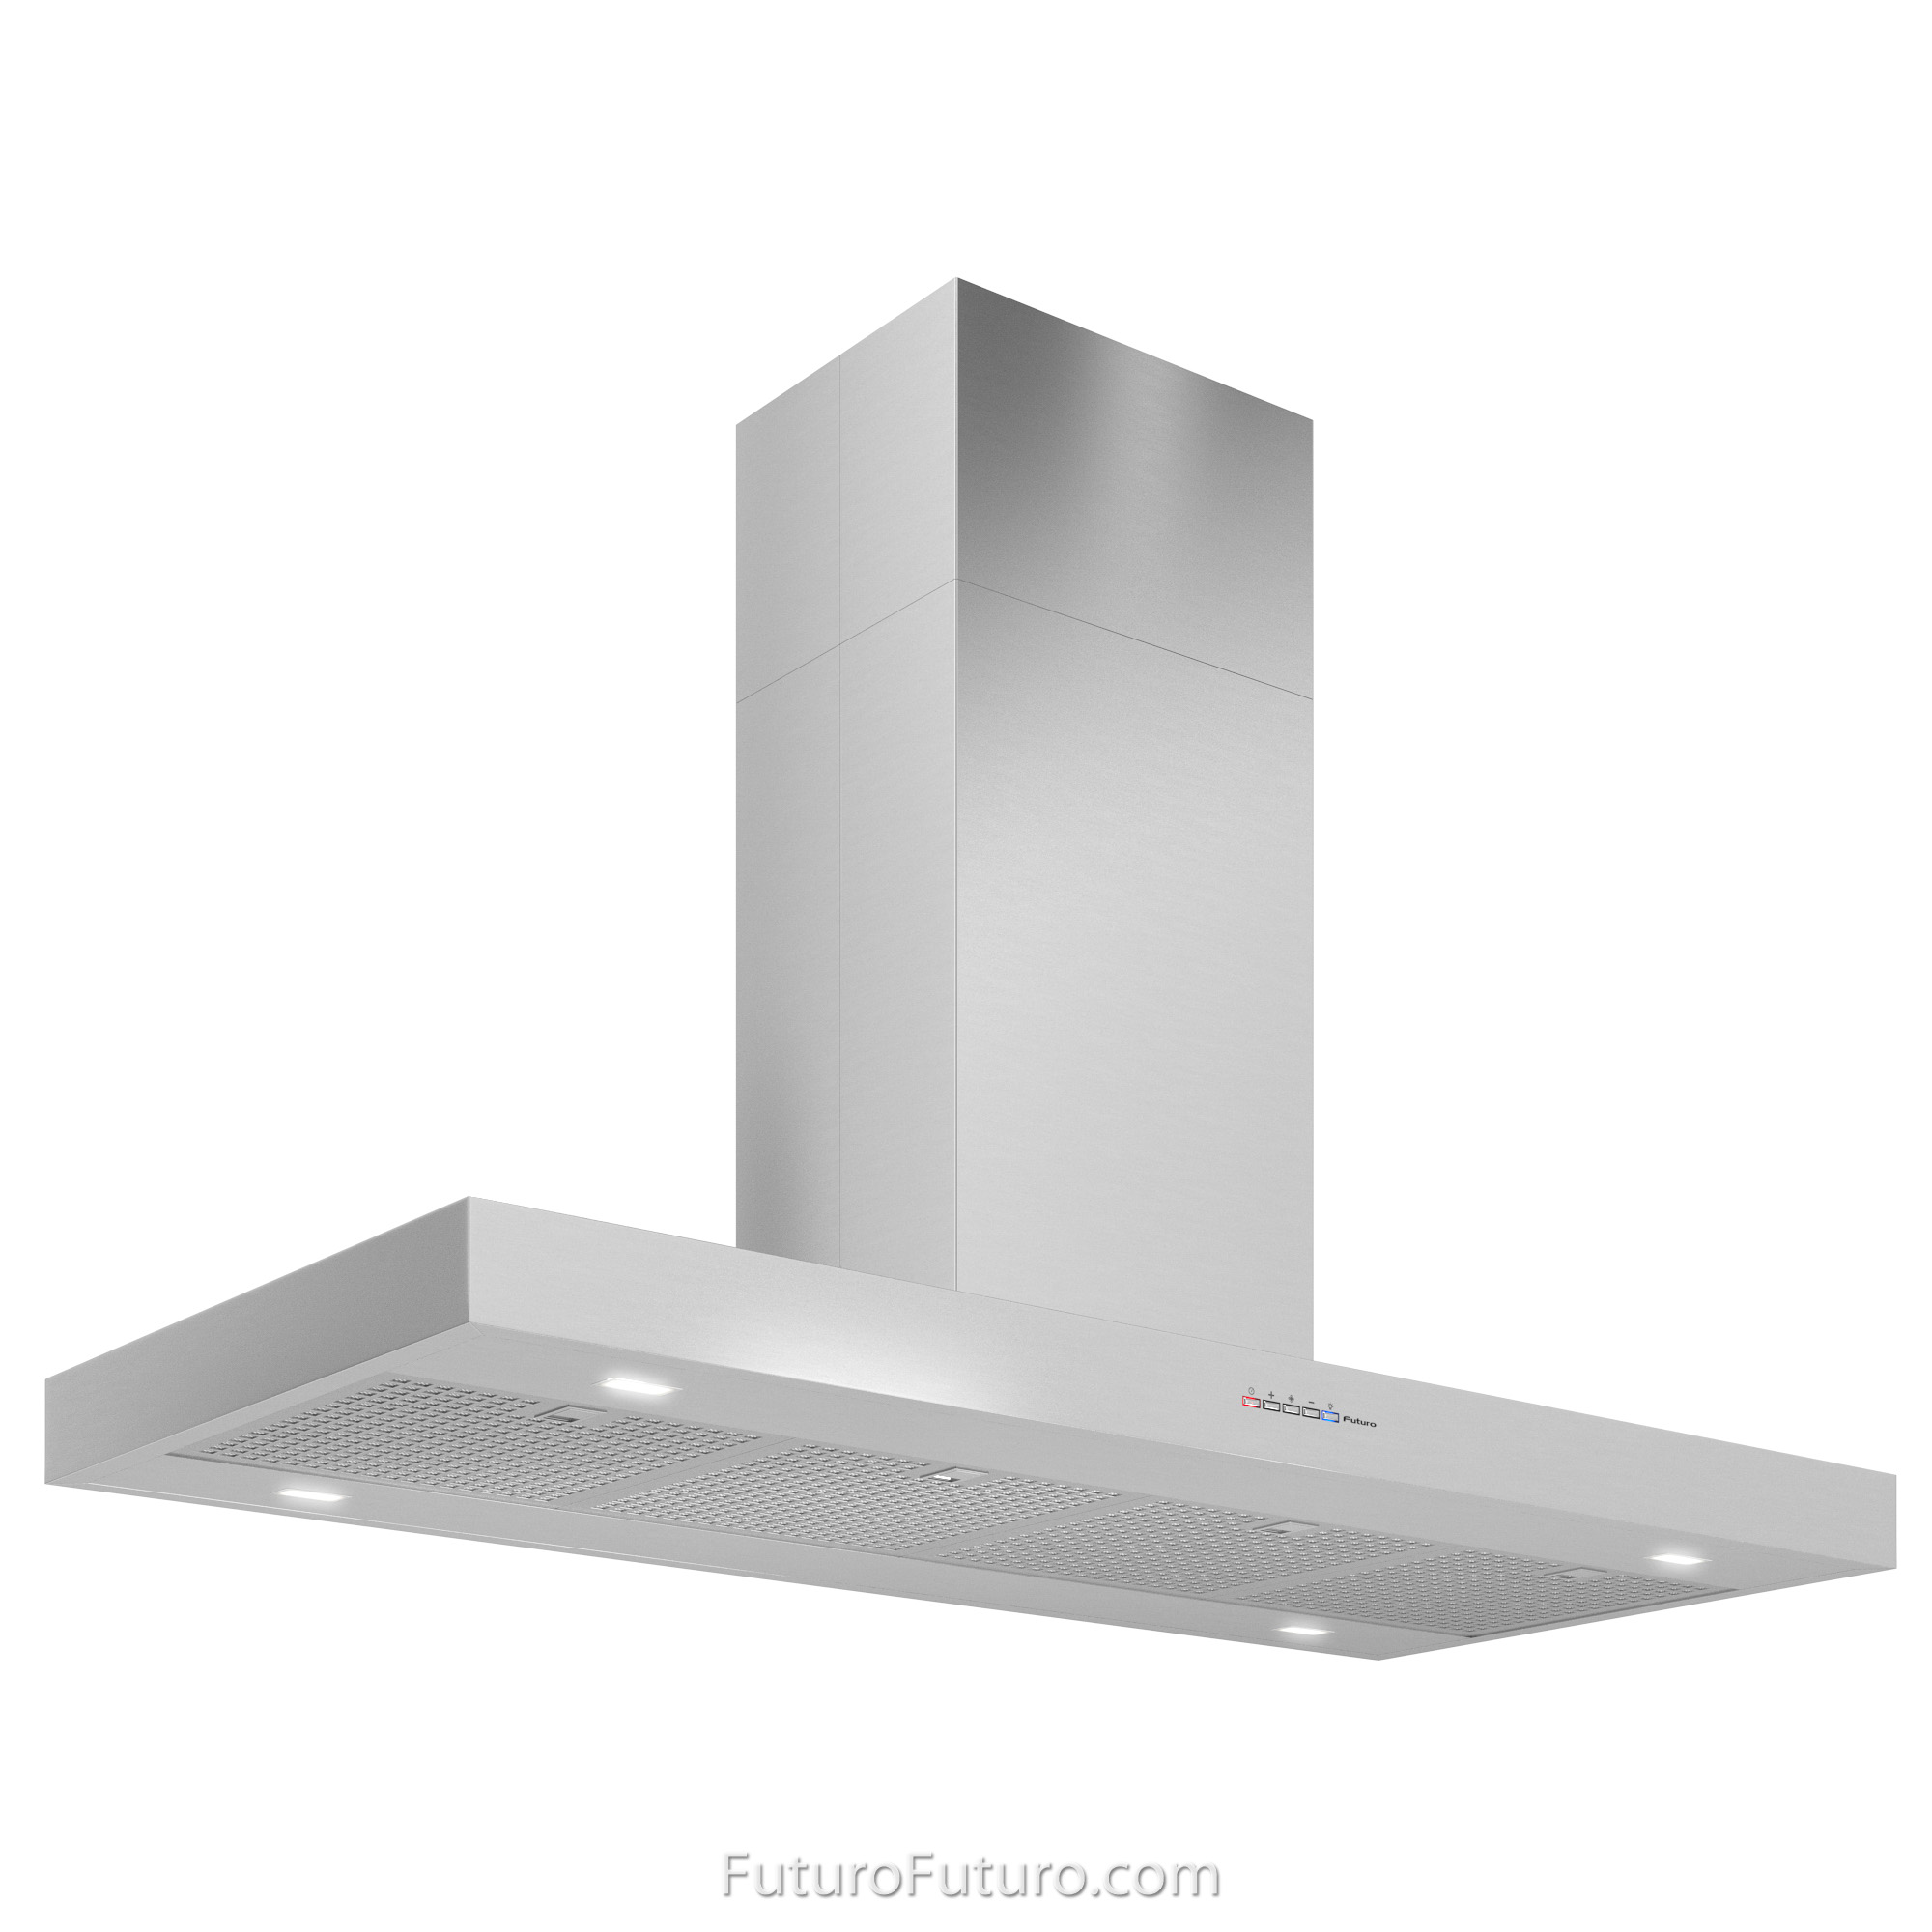 What Kind of Bulb Goes in A Range Hood? (Extended Tips)